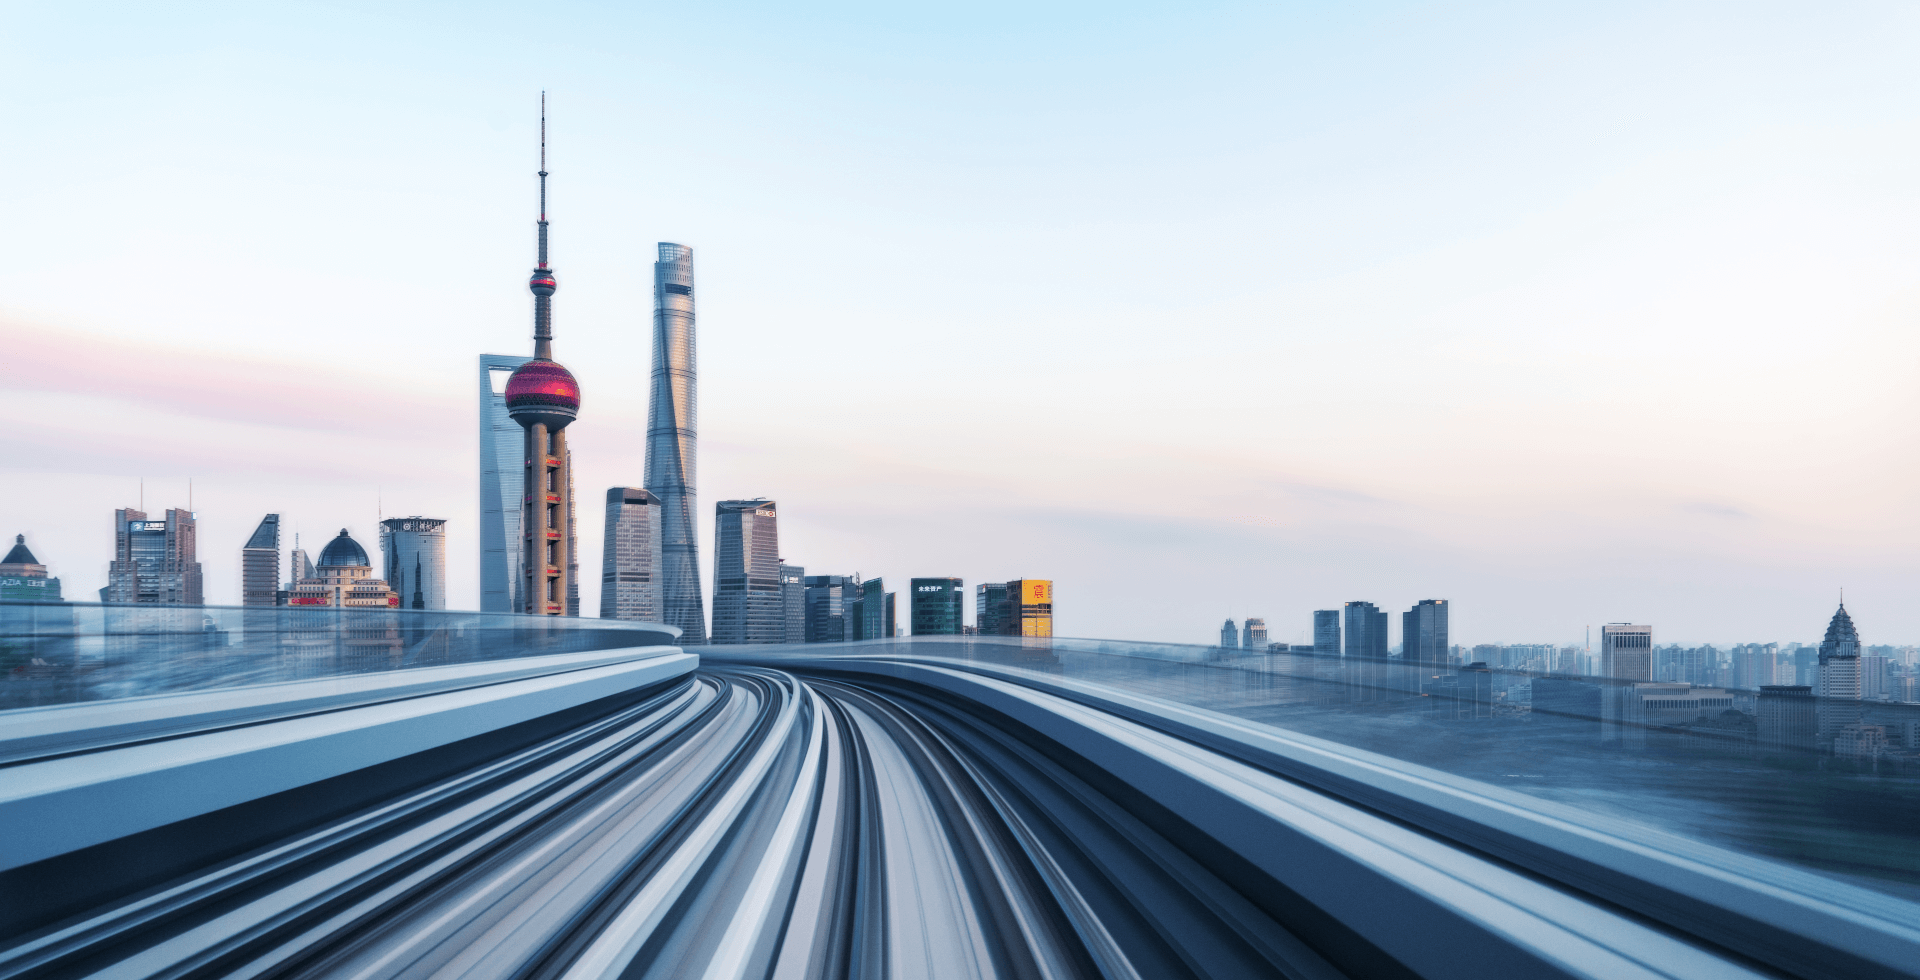 China’s property sector challenges signal an economy in transition - Allianz Global Investors